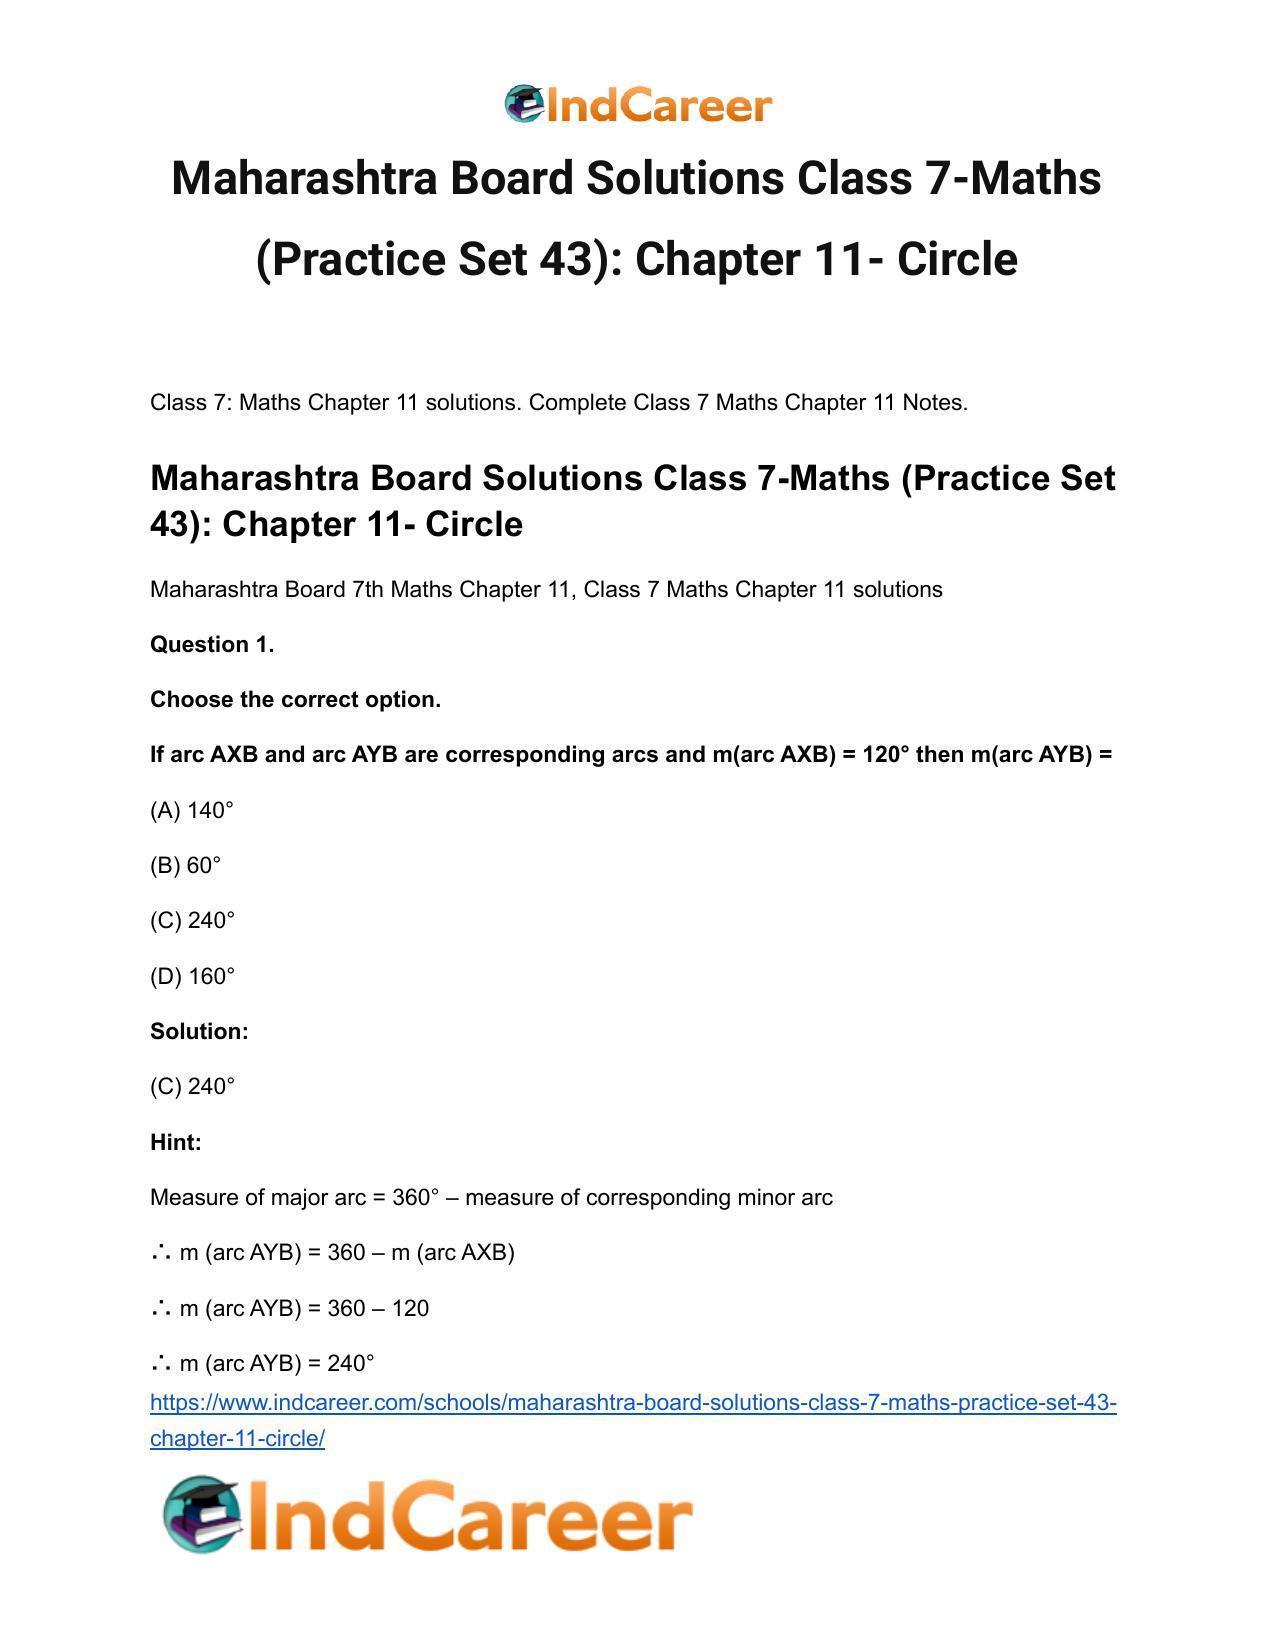 Maharashtra Board Solutions Class 7-Maths (Practice Set 43): Chapter 11- Circle - Page 2